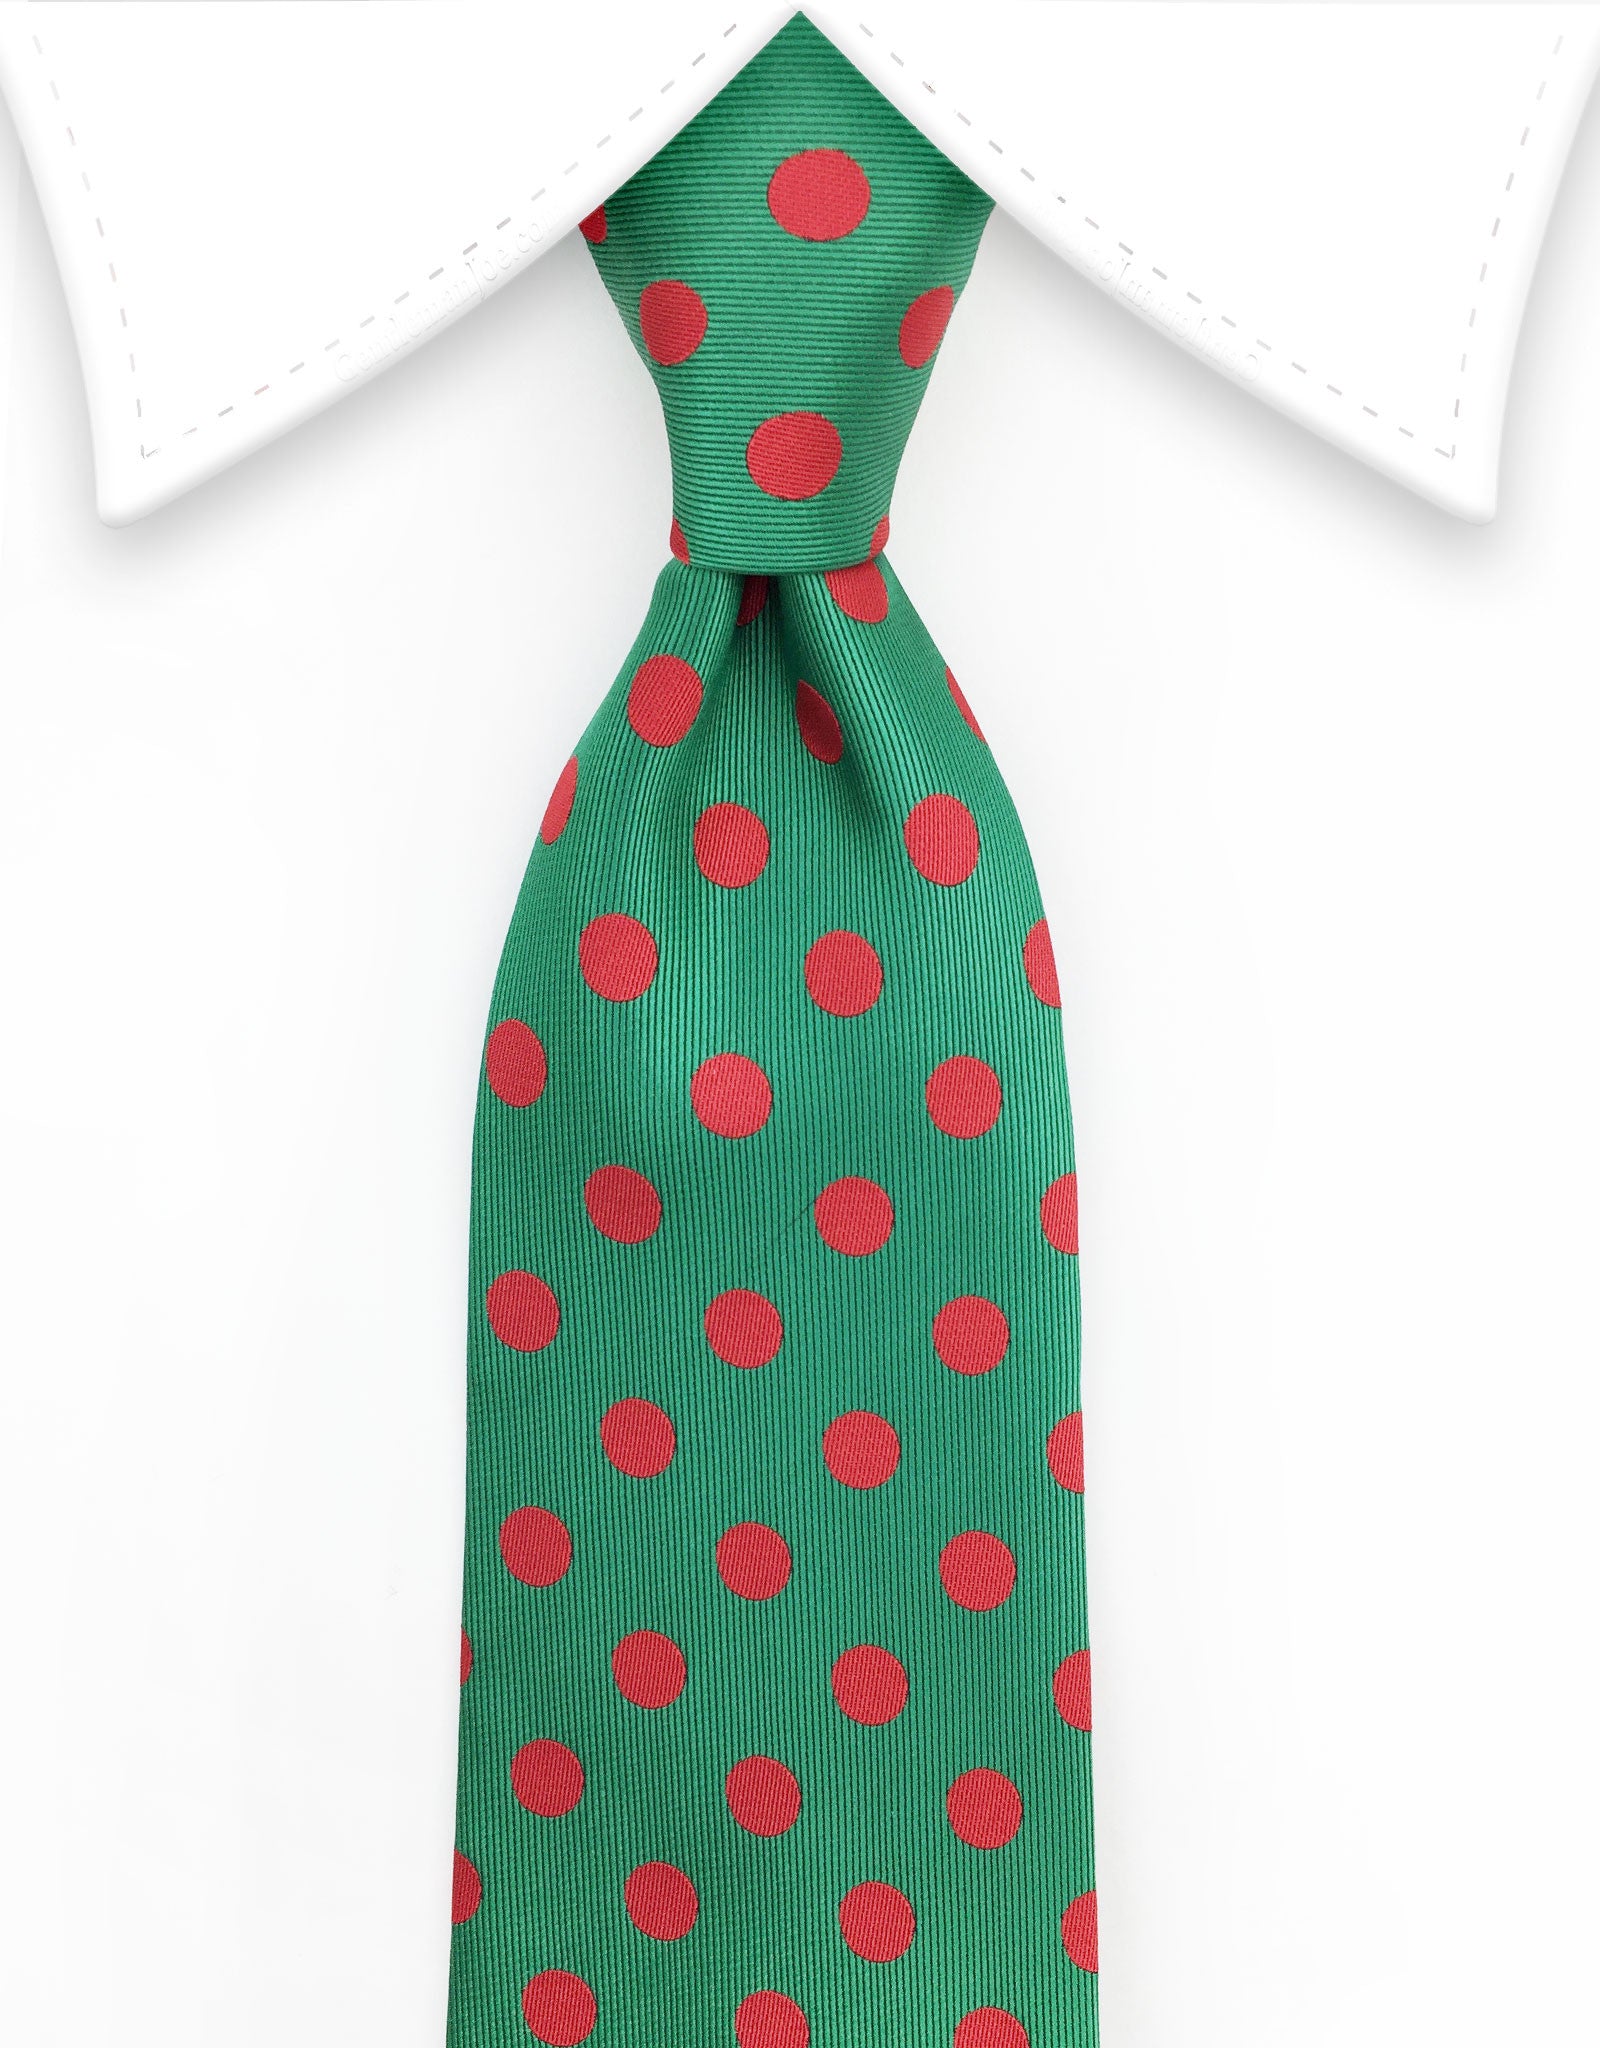 Green Tie with Red Polka Dots